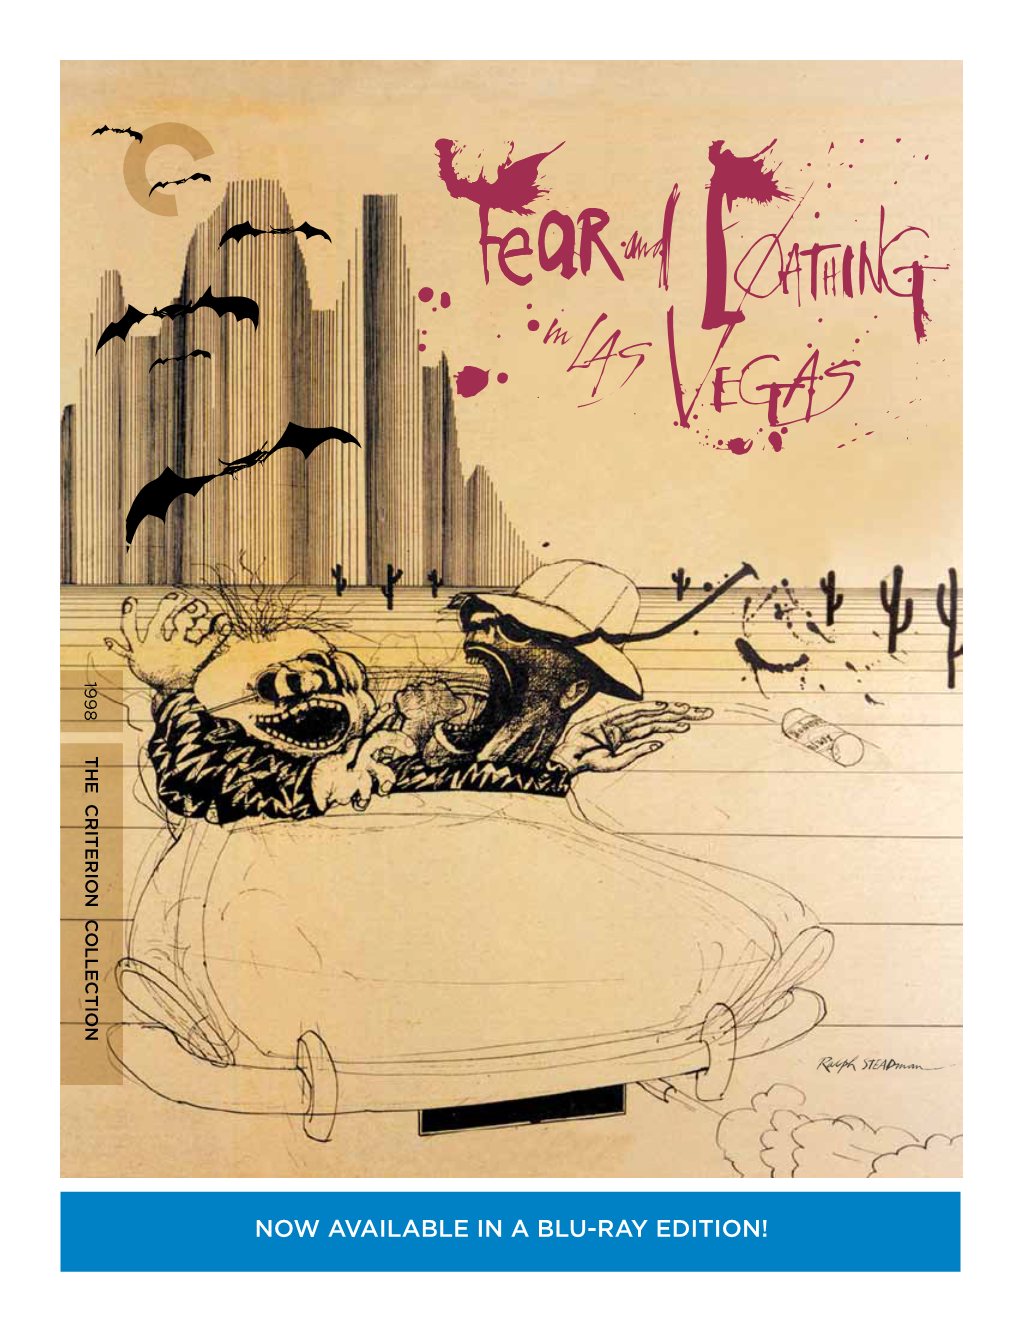 Now AVAILABLE in a BLU-RAY Edition! the CRITERION COLLECTION PRESENTS Fear and Loathing in Las Vegas